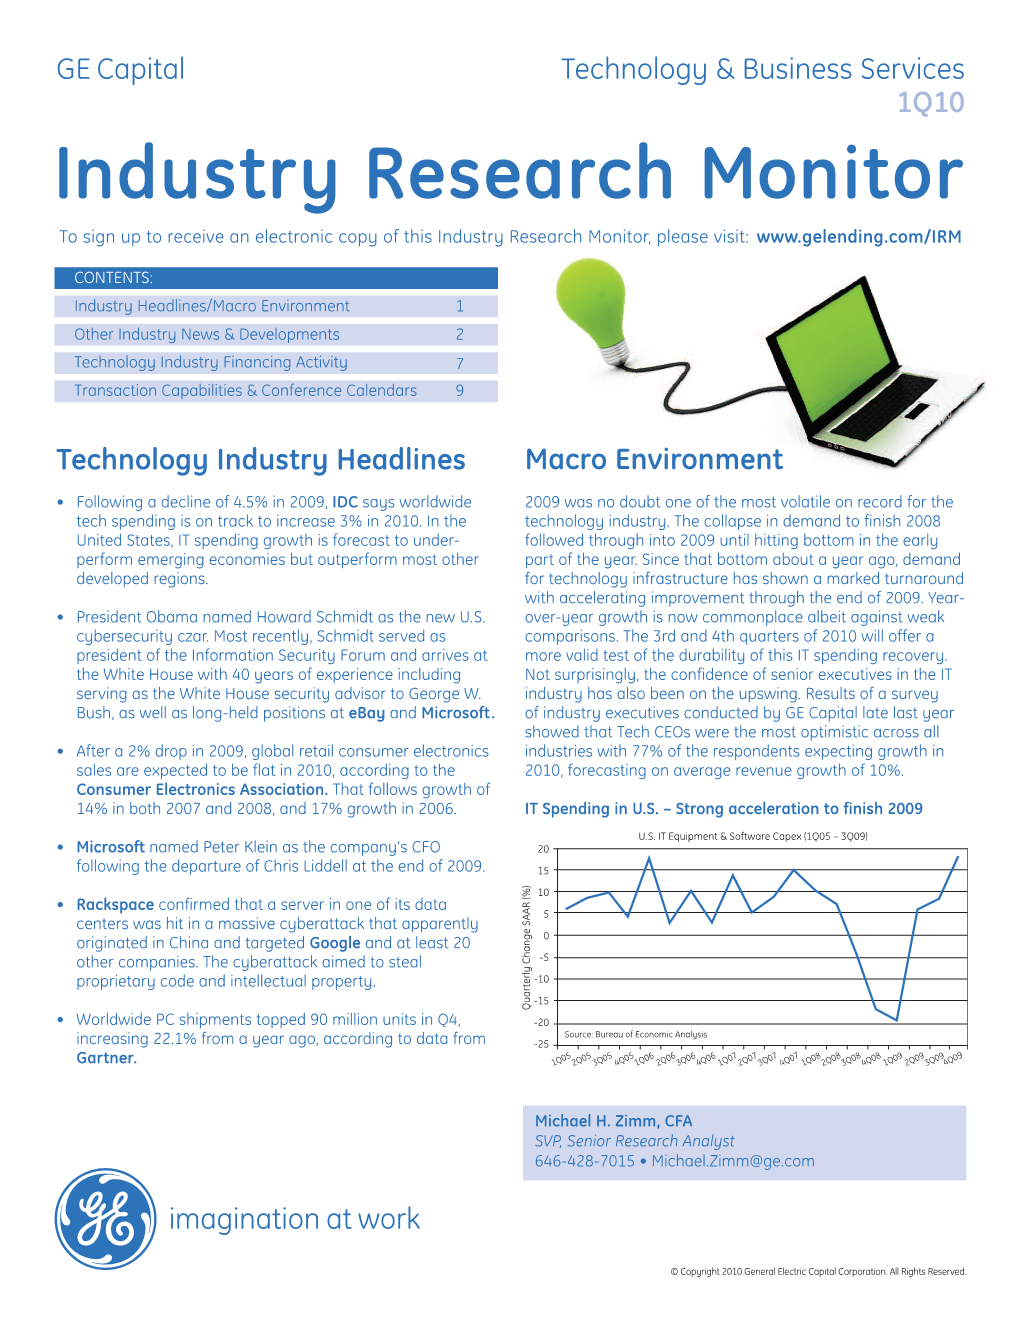 Industry Research Monitor to Sign up to Receive an Electronic Copy of This Industry Research Monitor, Please Visit